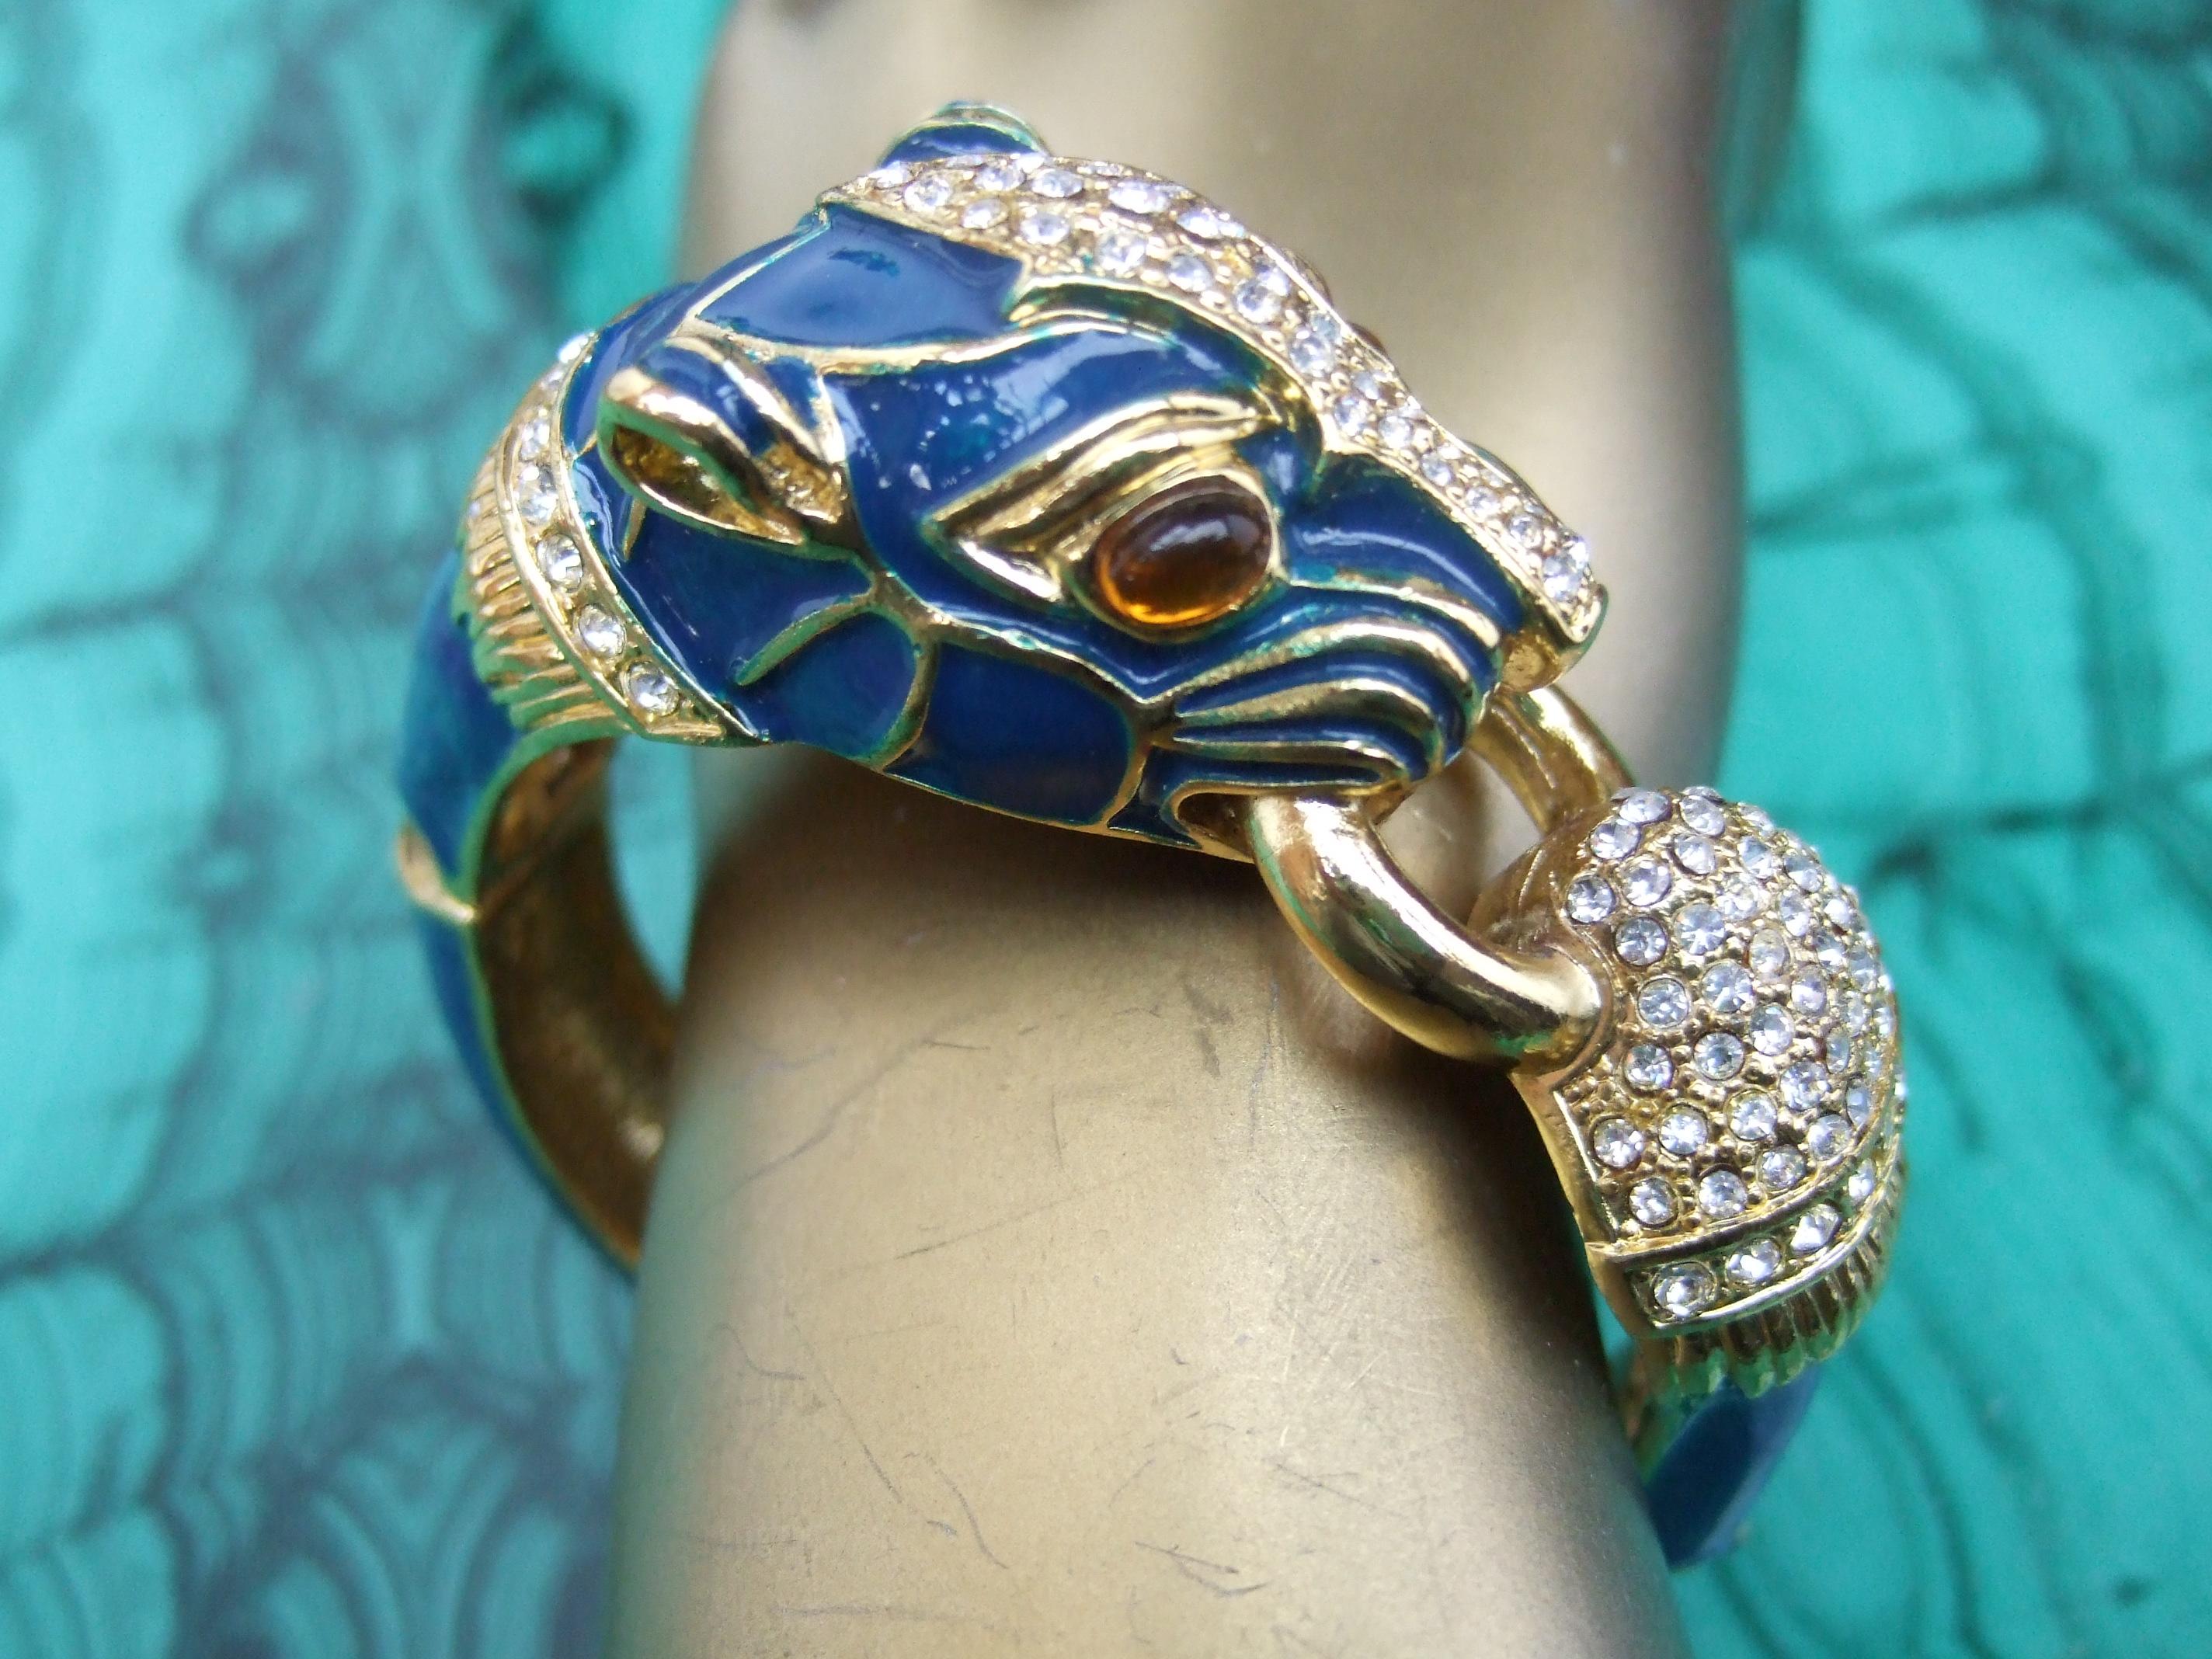 Gilt metal crystal panther jeweled enamel hinged bangle bracelet c 1980s
The elegant bracelet is designed with an exotic panther sheathed in blue enamel
The panther is embellished with amber glass color cabochon eyes 

The panther is designed with a